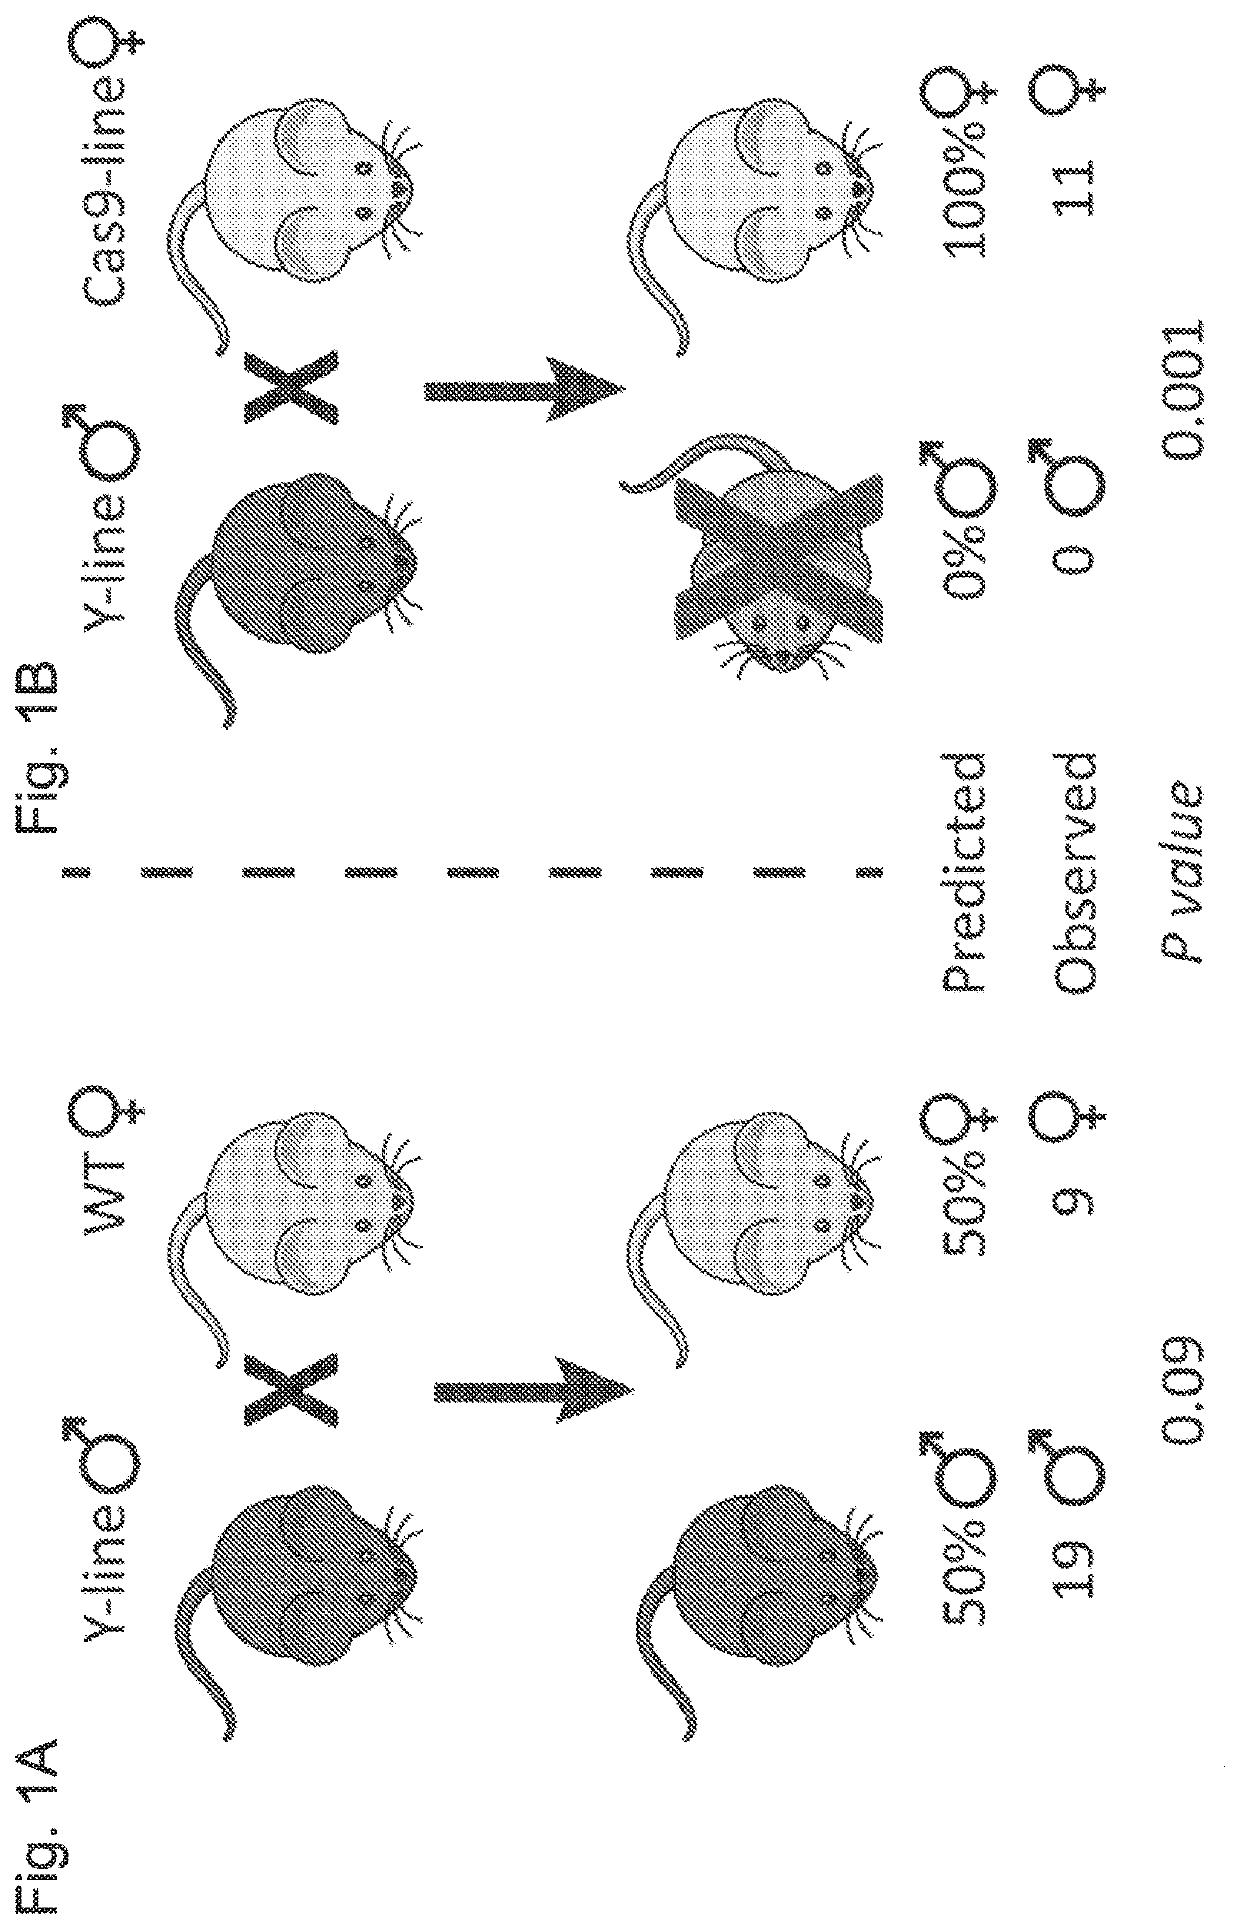 Transgenic eukaryotic organisms and methods for gender selection